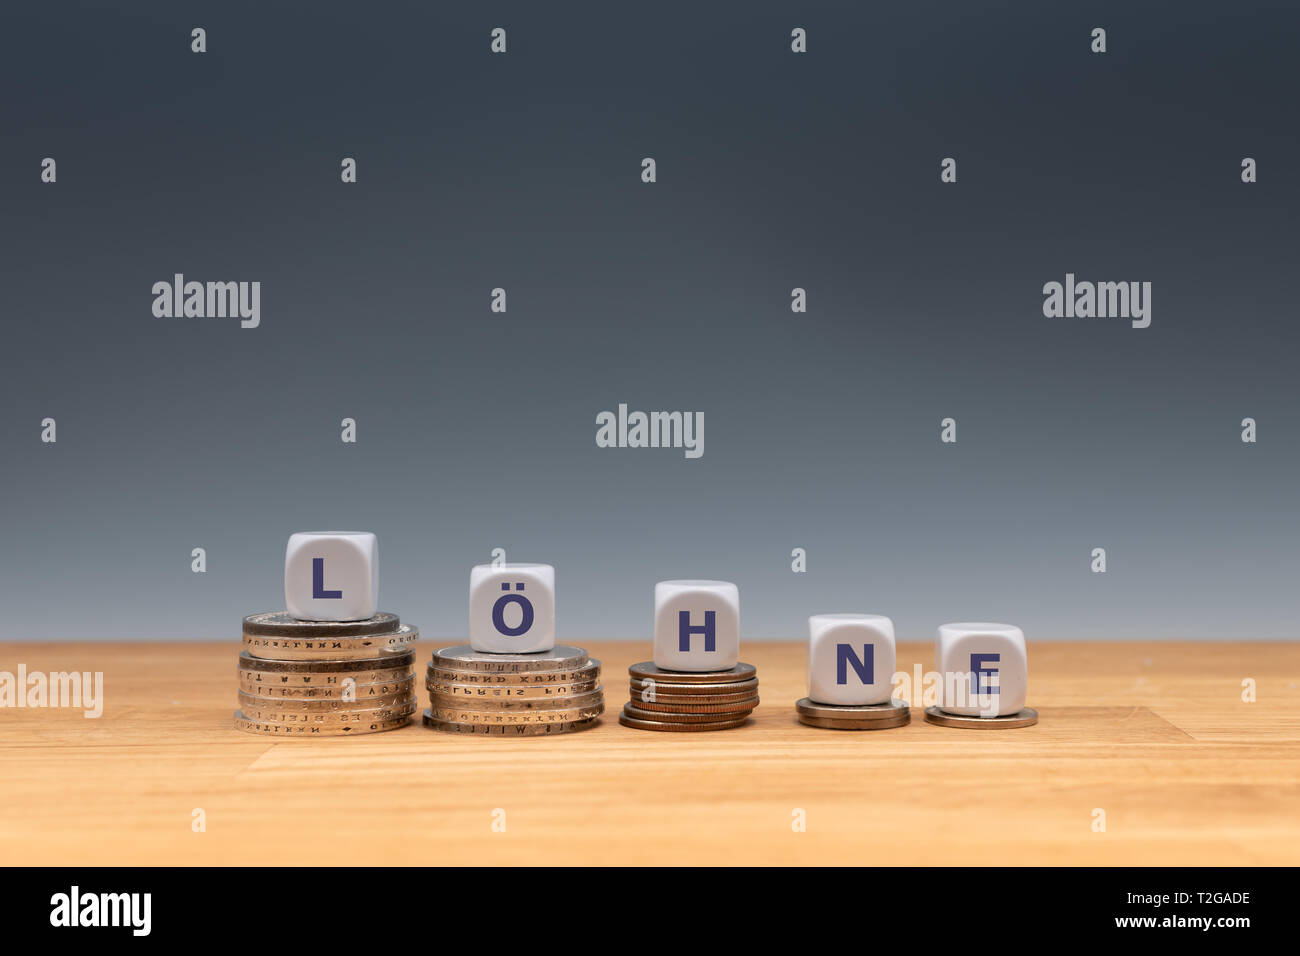 Symbol for declining wages. Dice placed on stacks of coins form the German word 'LÖHNE' ('WAGES' in English). Stock Photo